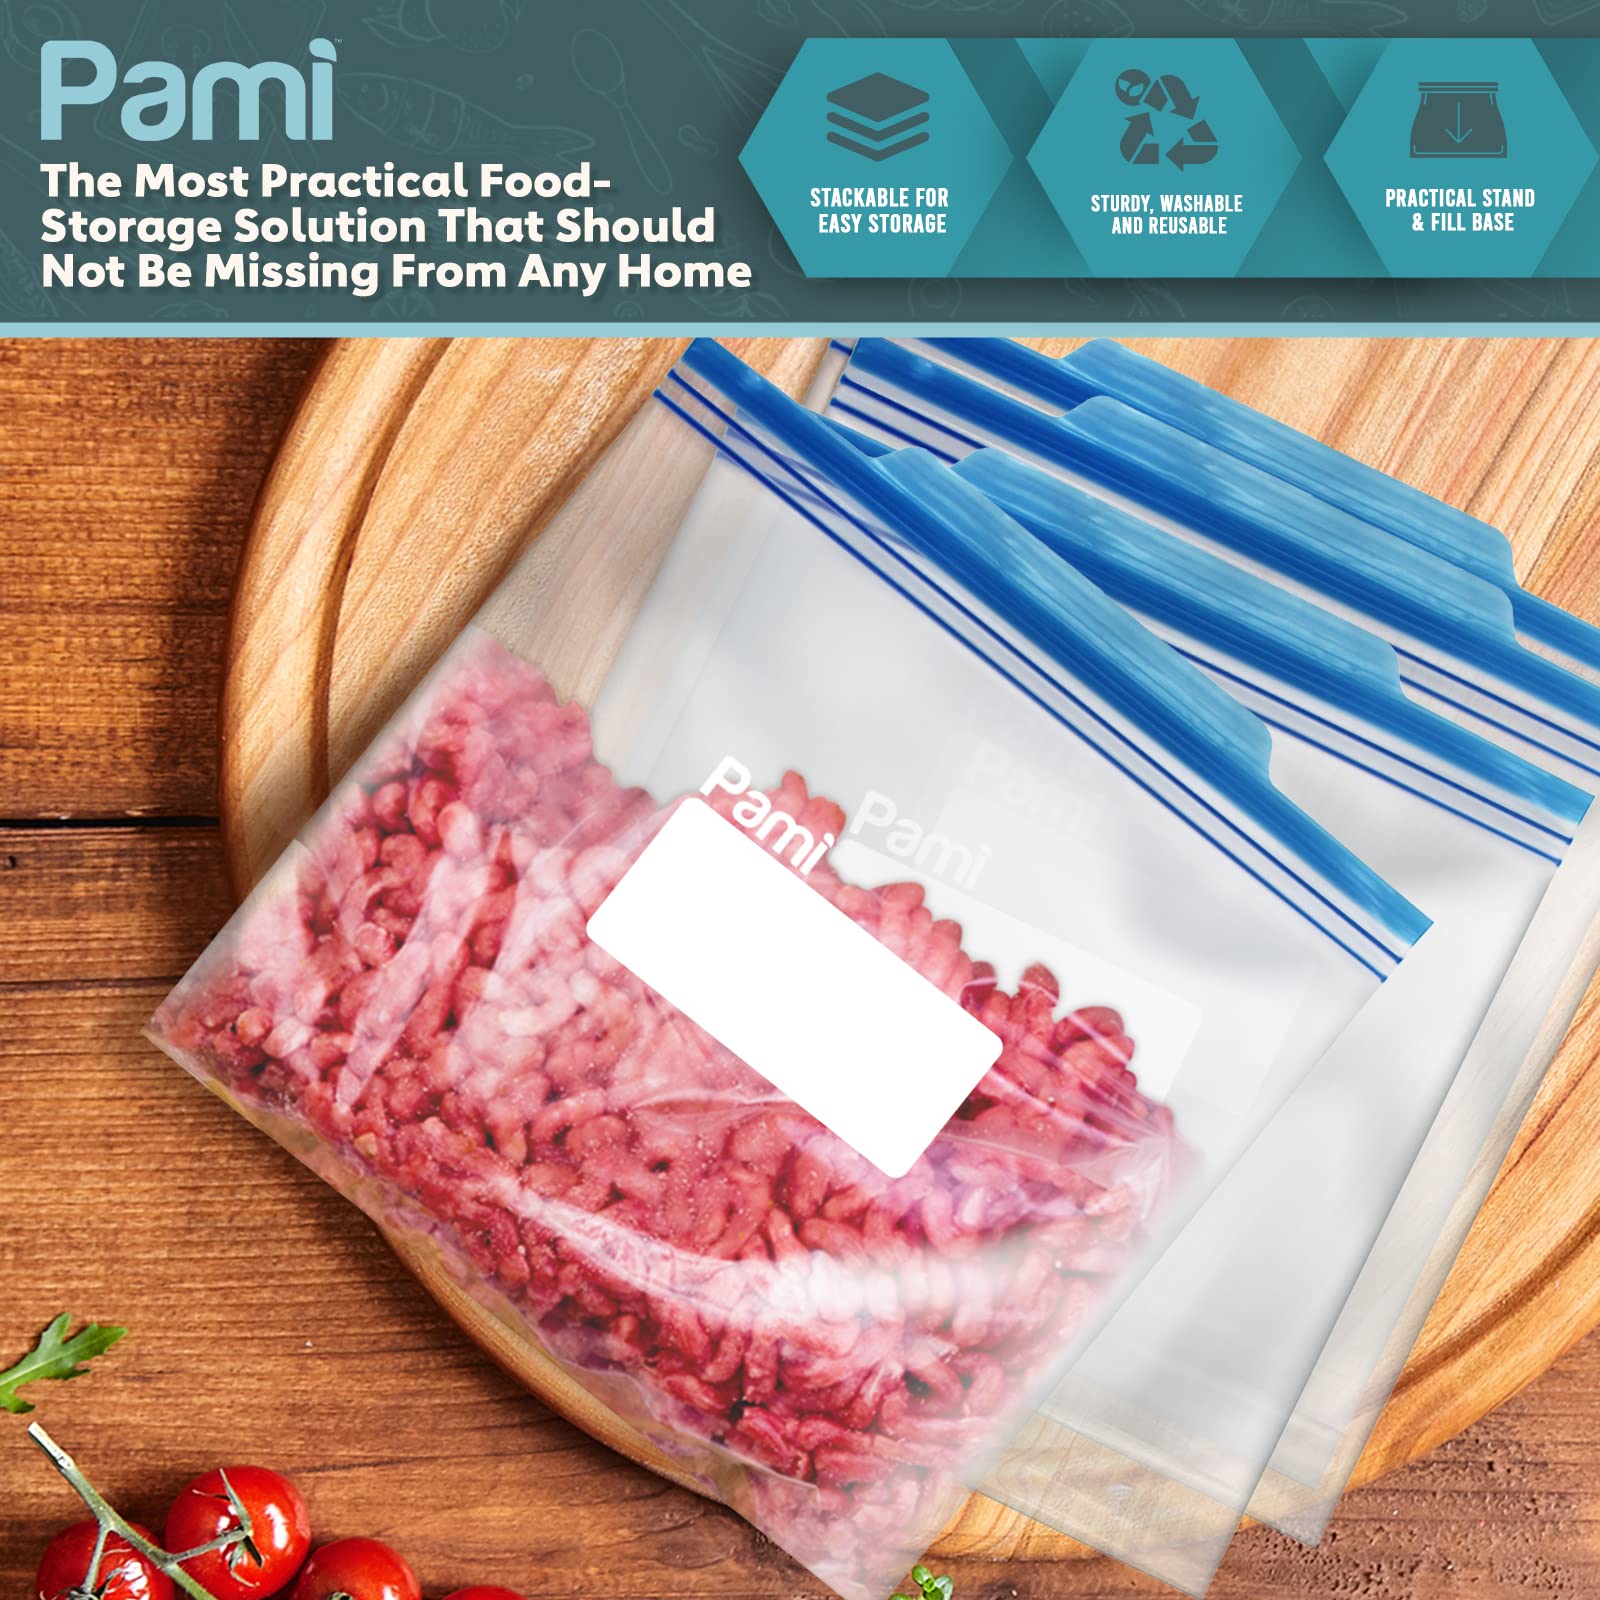 PAMI Freezer Zipper Gallon Bags [60 Pieces] - Leakproof Food Storage Freshness-Lock Bags With Expandable Bottom- Food-Safe Slider Zipper Bags